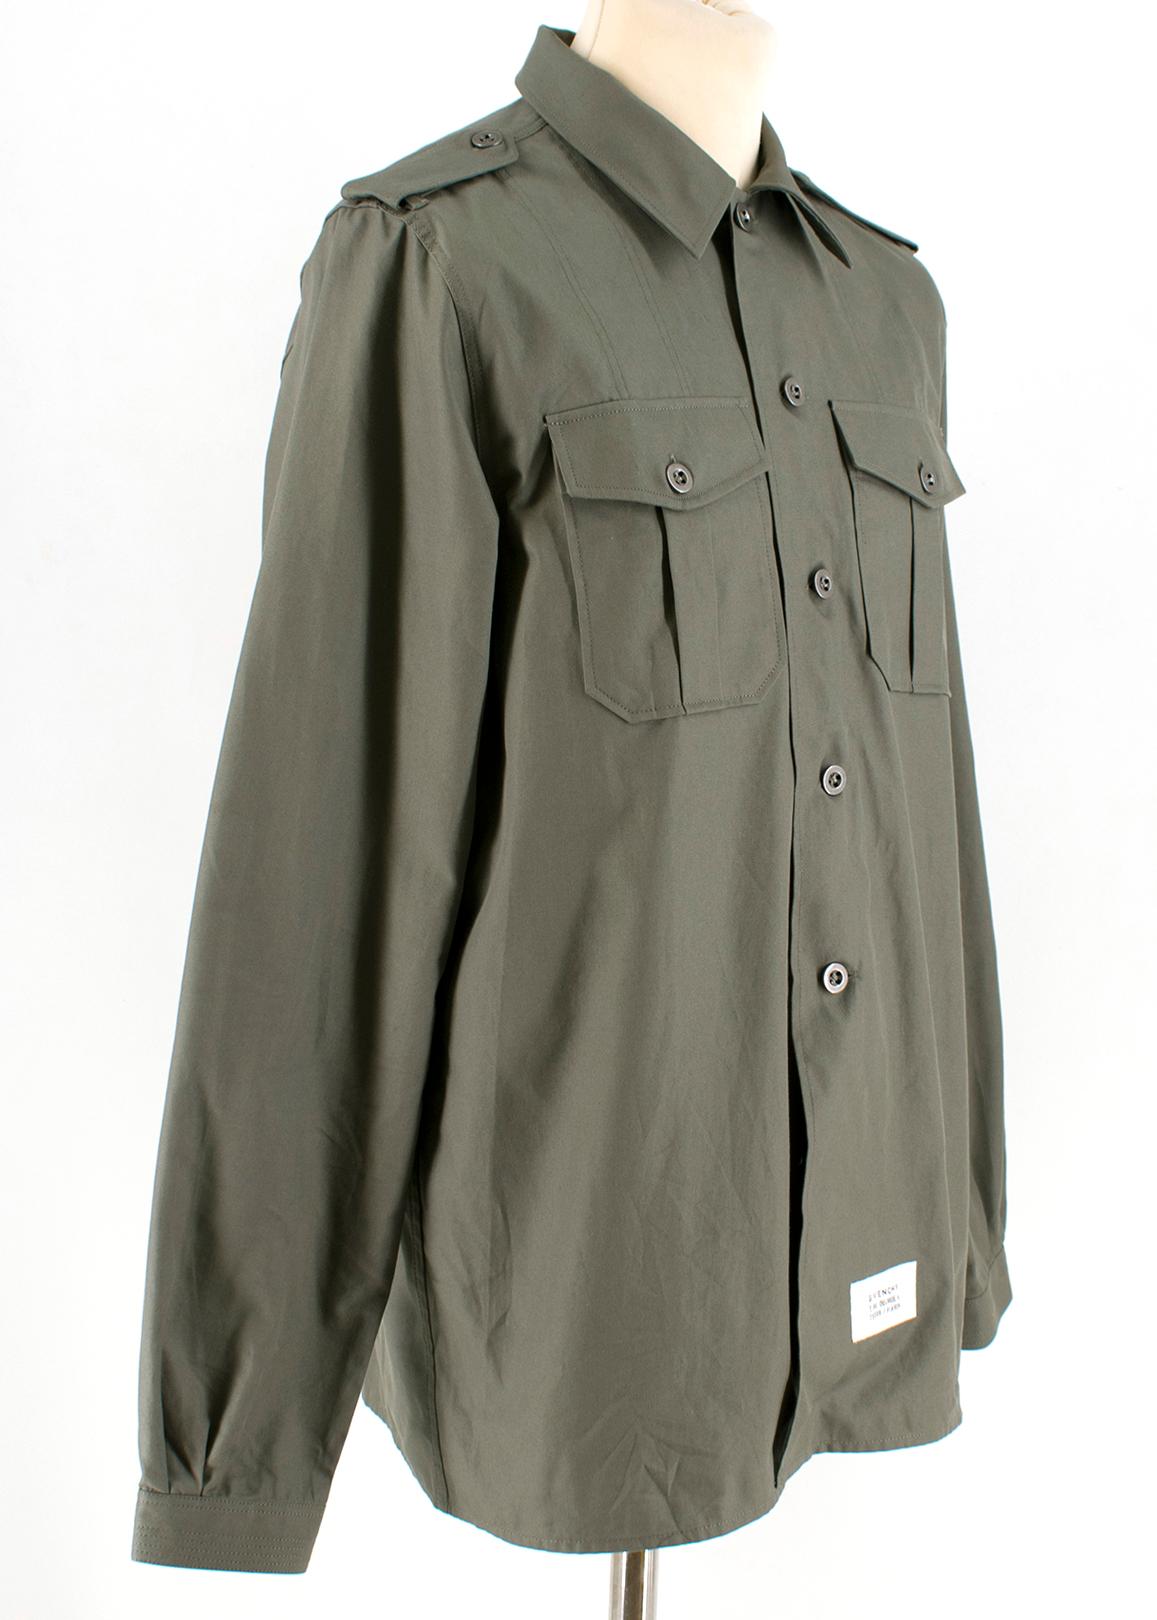 Givenchy Army Green Military Shirt Size 